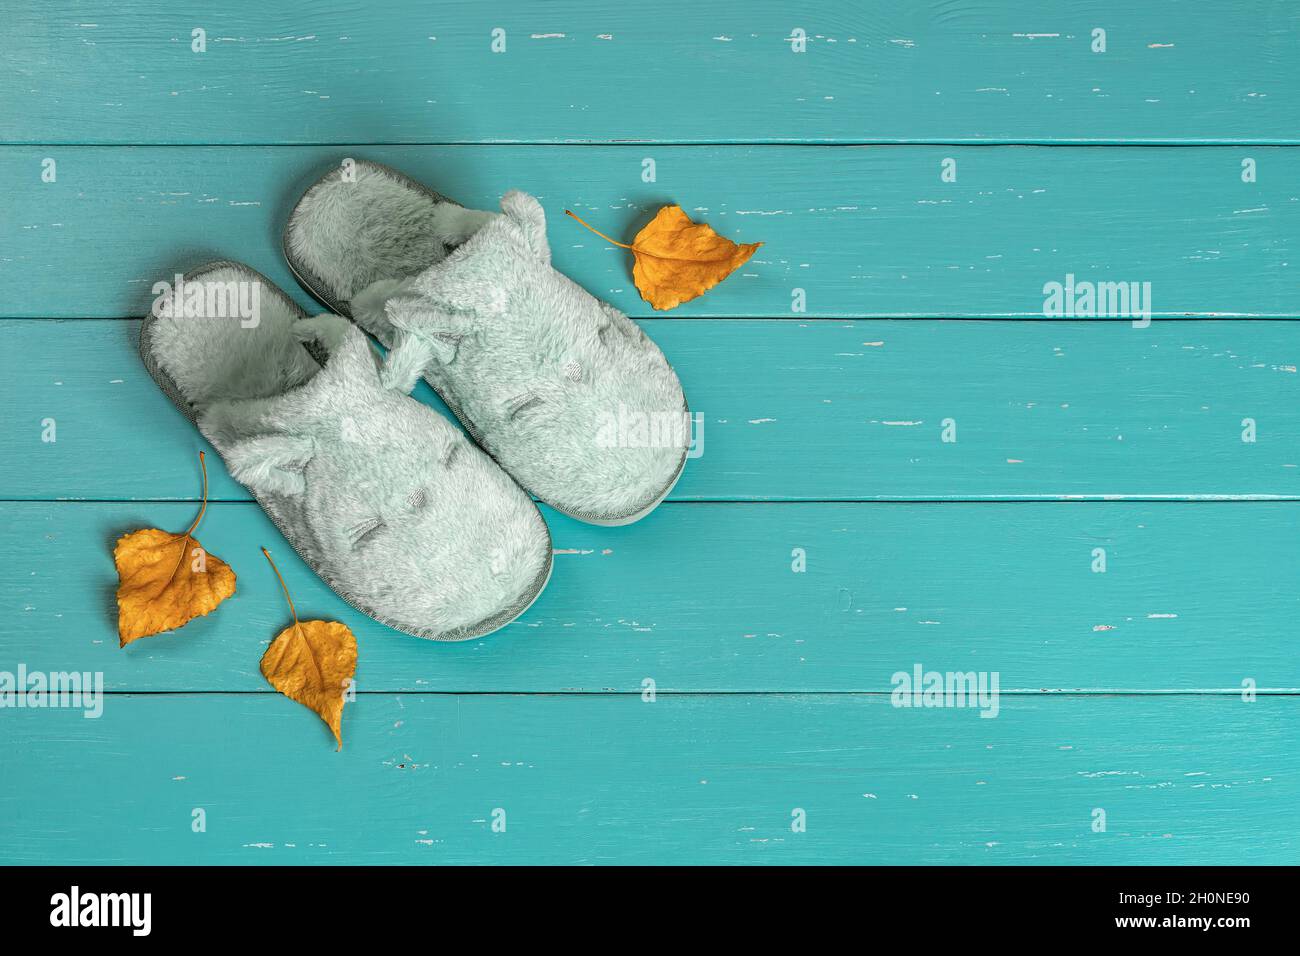 Funny light blue cat face slippers and few dry yellow autumn leaves over turquoise wooden surface. New cozy domestic footwear for cold season. Stock Photo